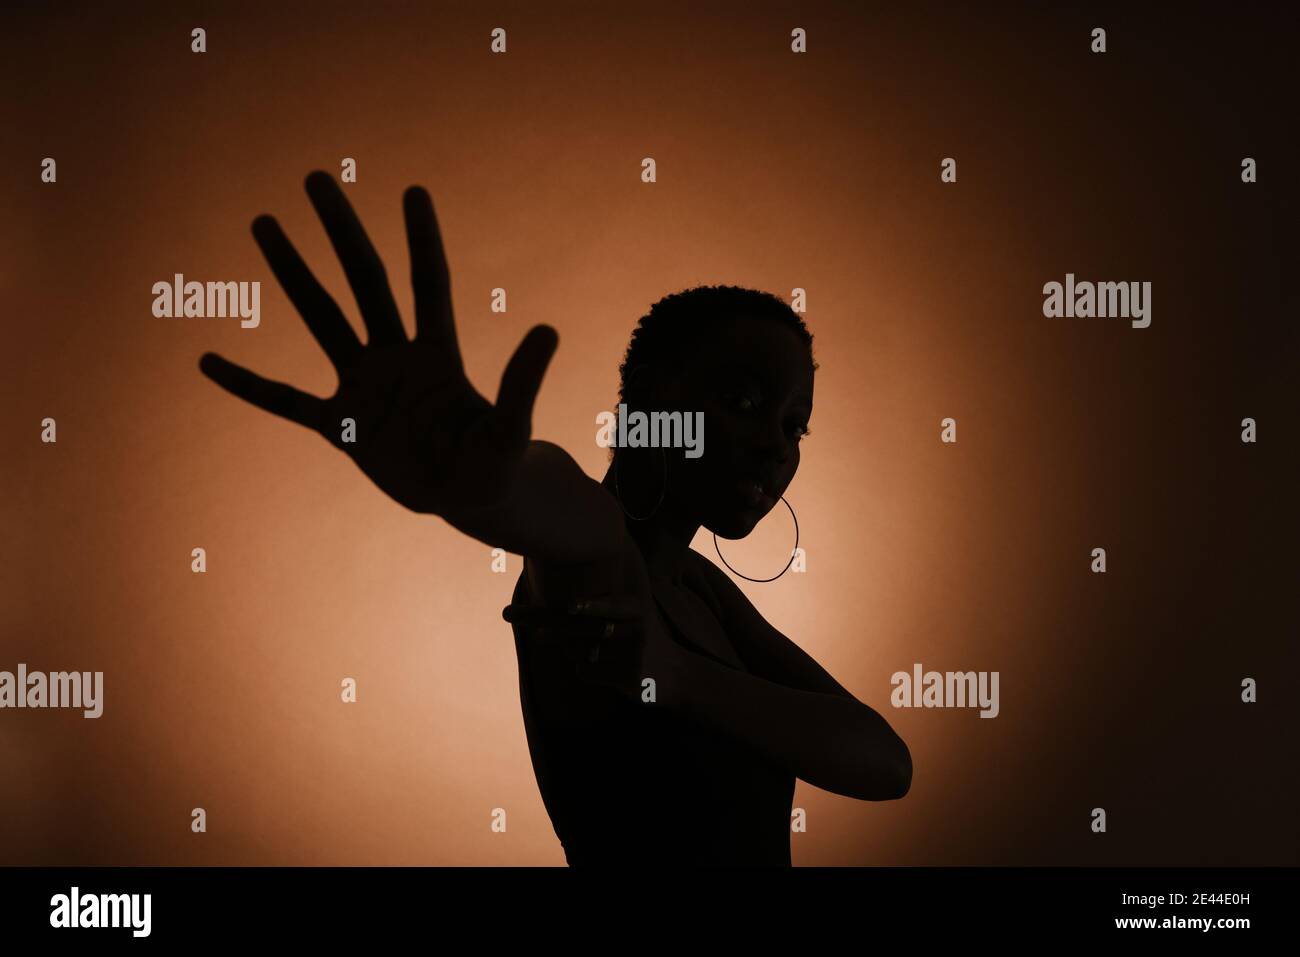 Silhouette of unrecognizable slender female making protective gesture against brown background Stock Photo